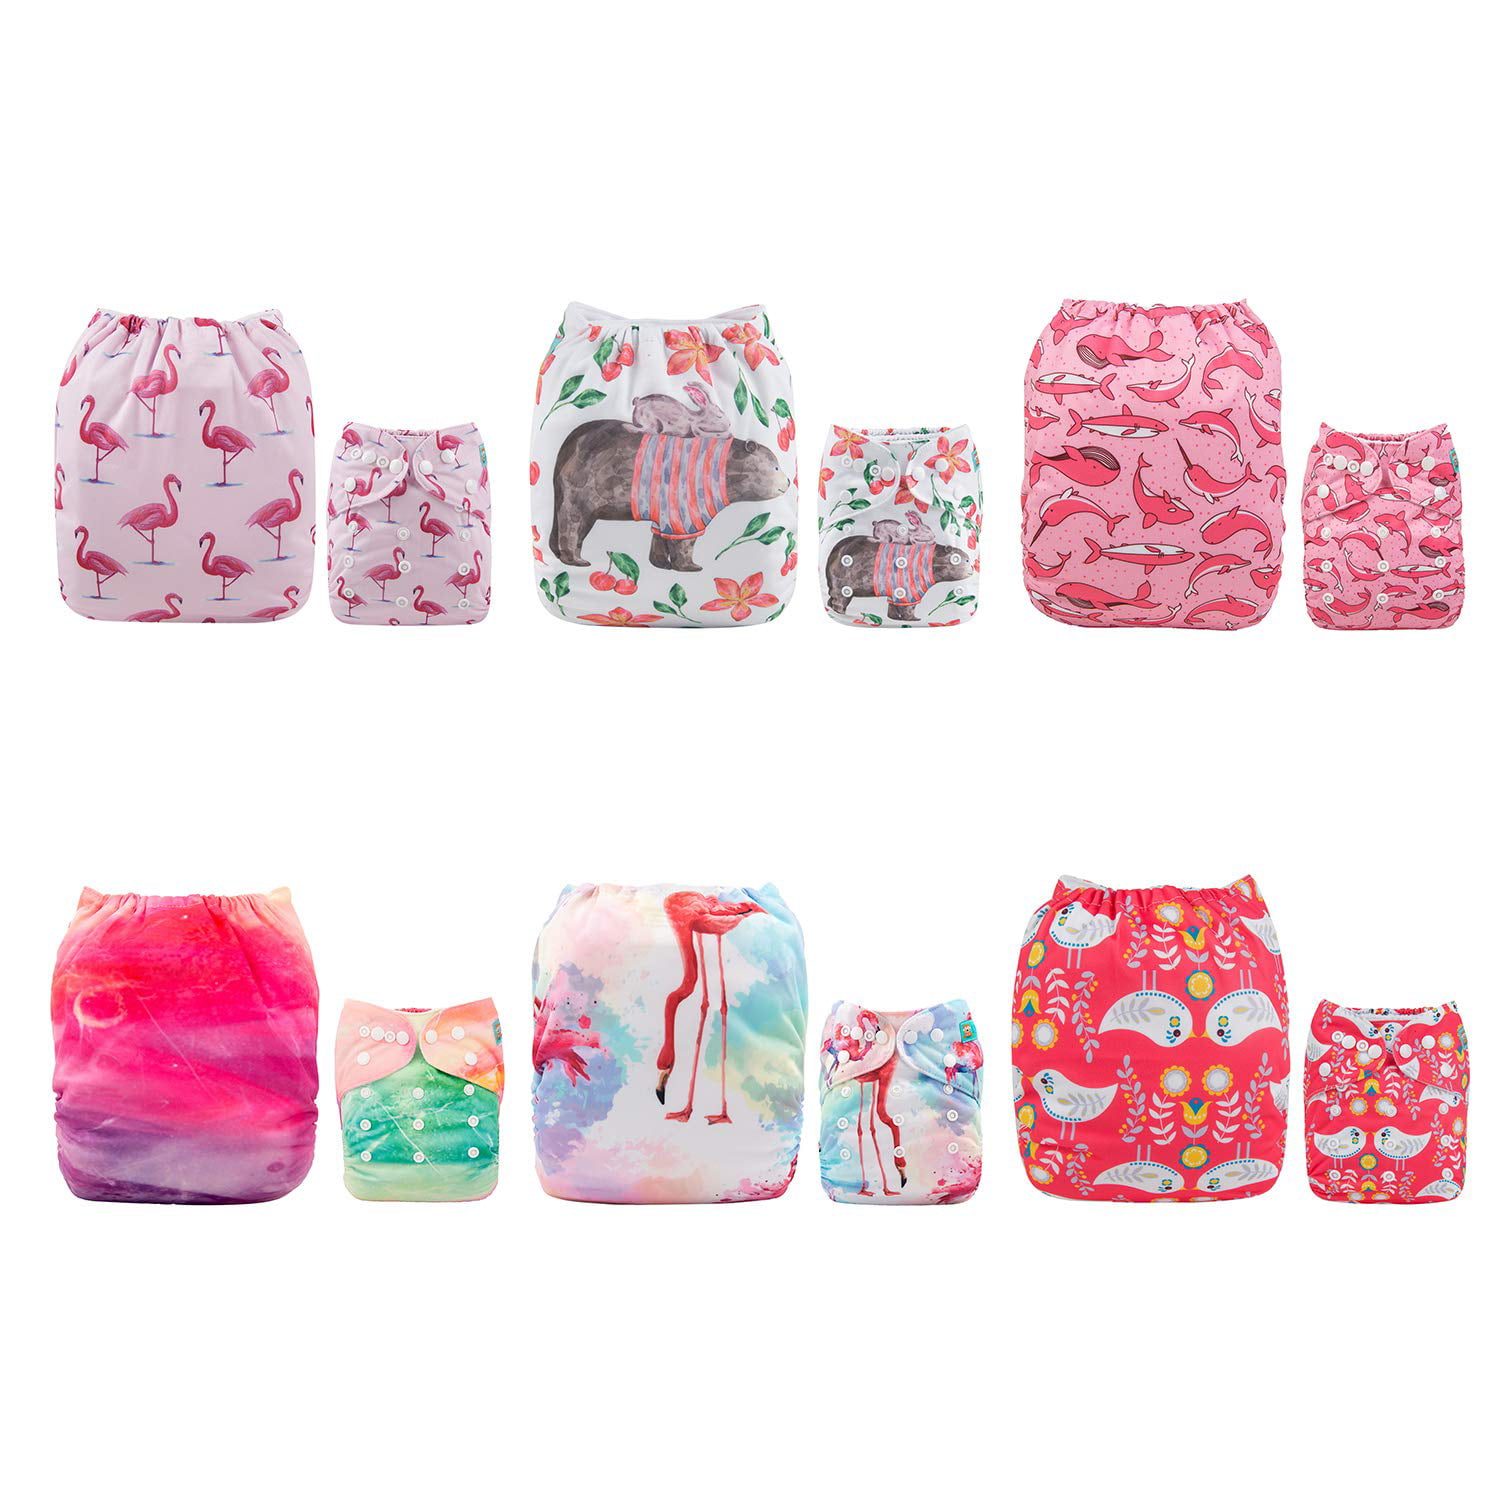 12 Inserts ALVABABY Cloth Diapers Washable Reusable Adjustable 6 PCS